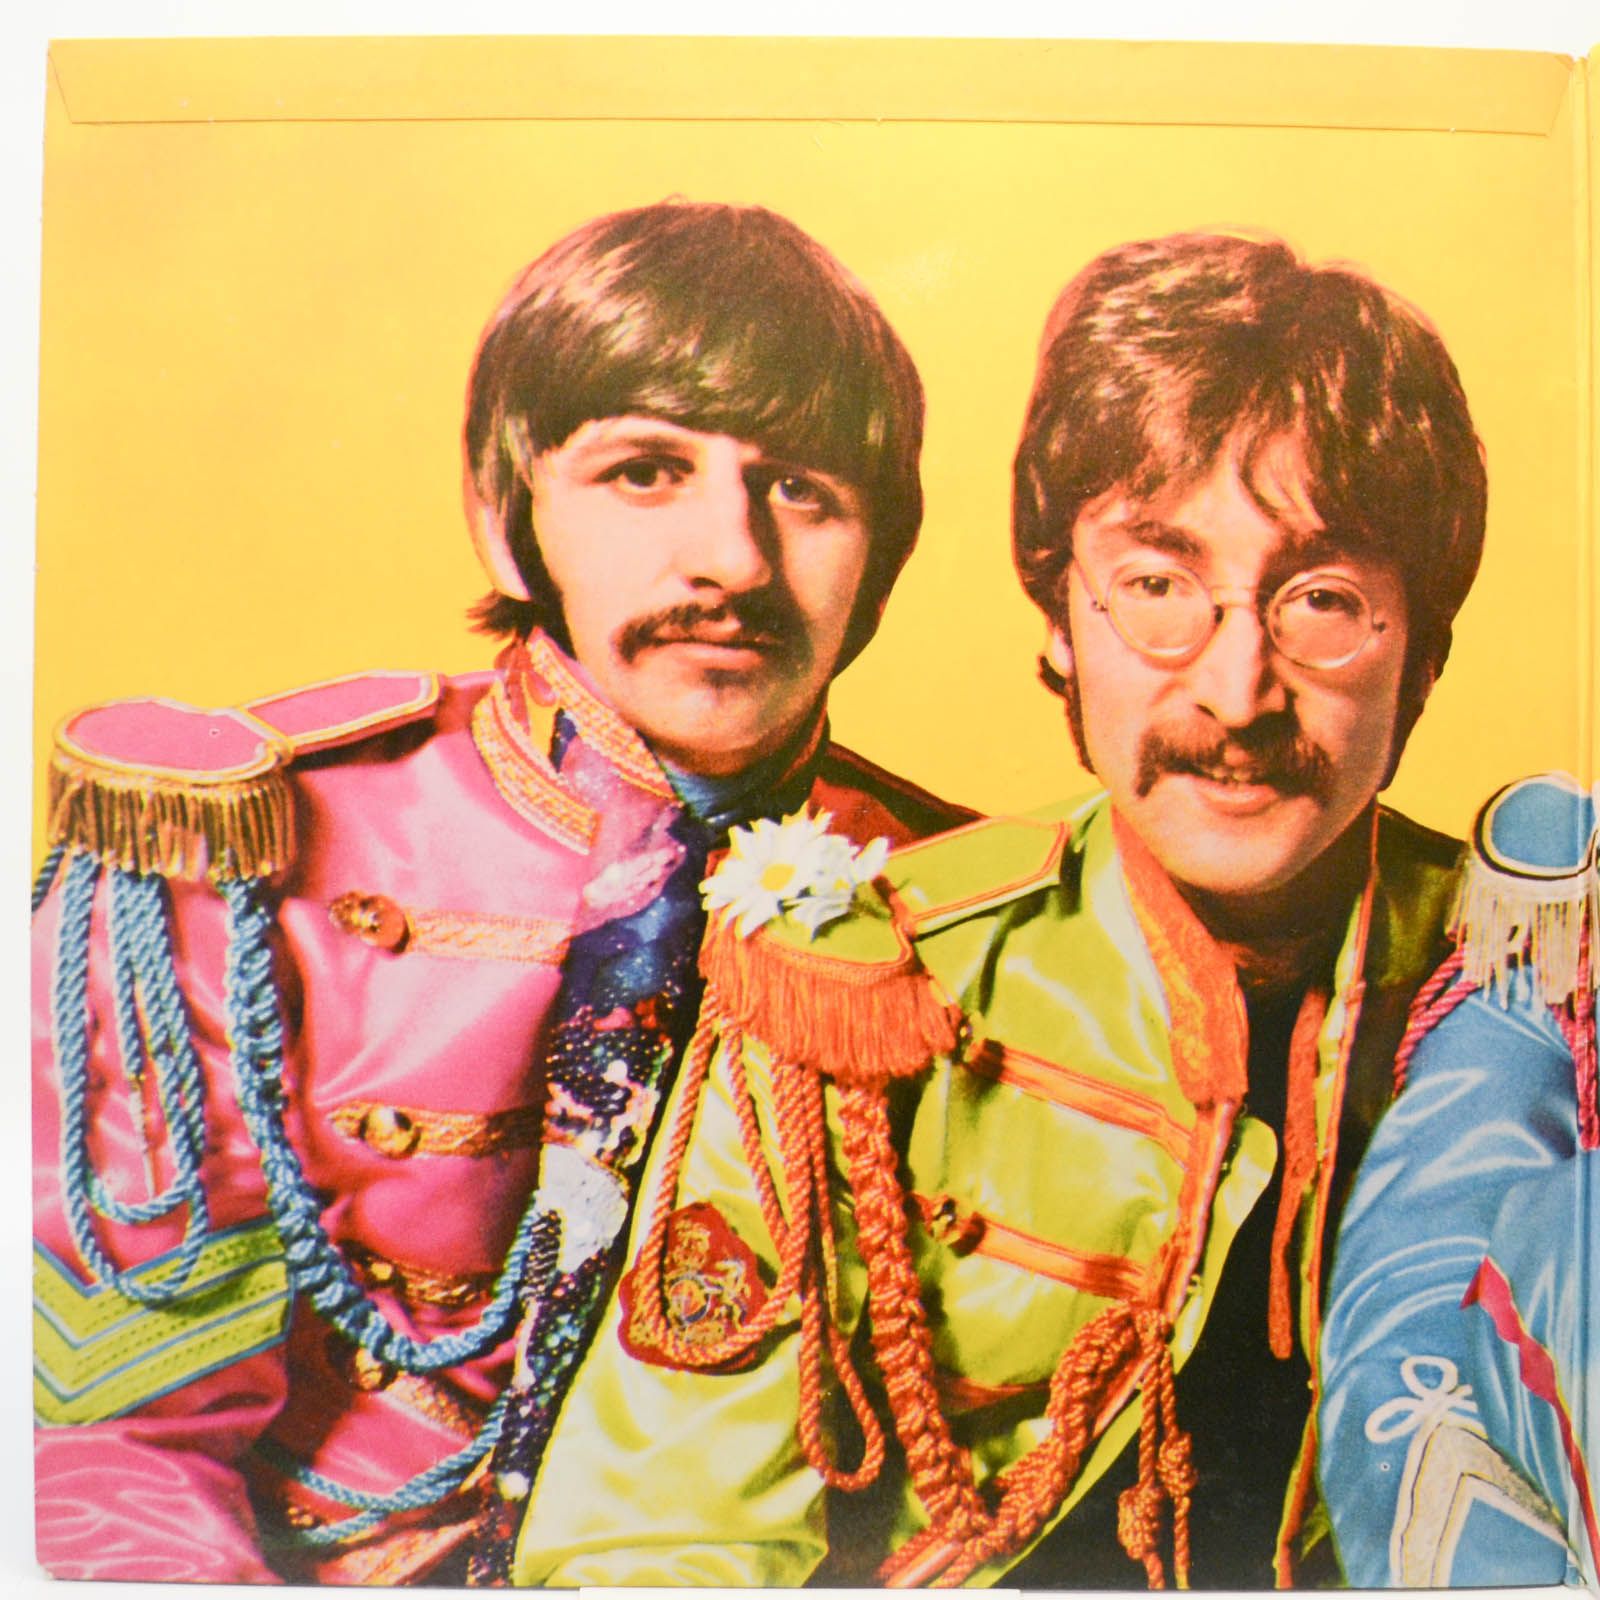 Beatles — Sgt. Pepper's Lonely Hearts Club Band, 1967